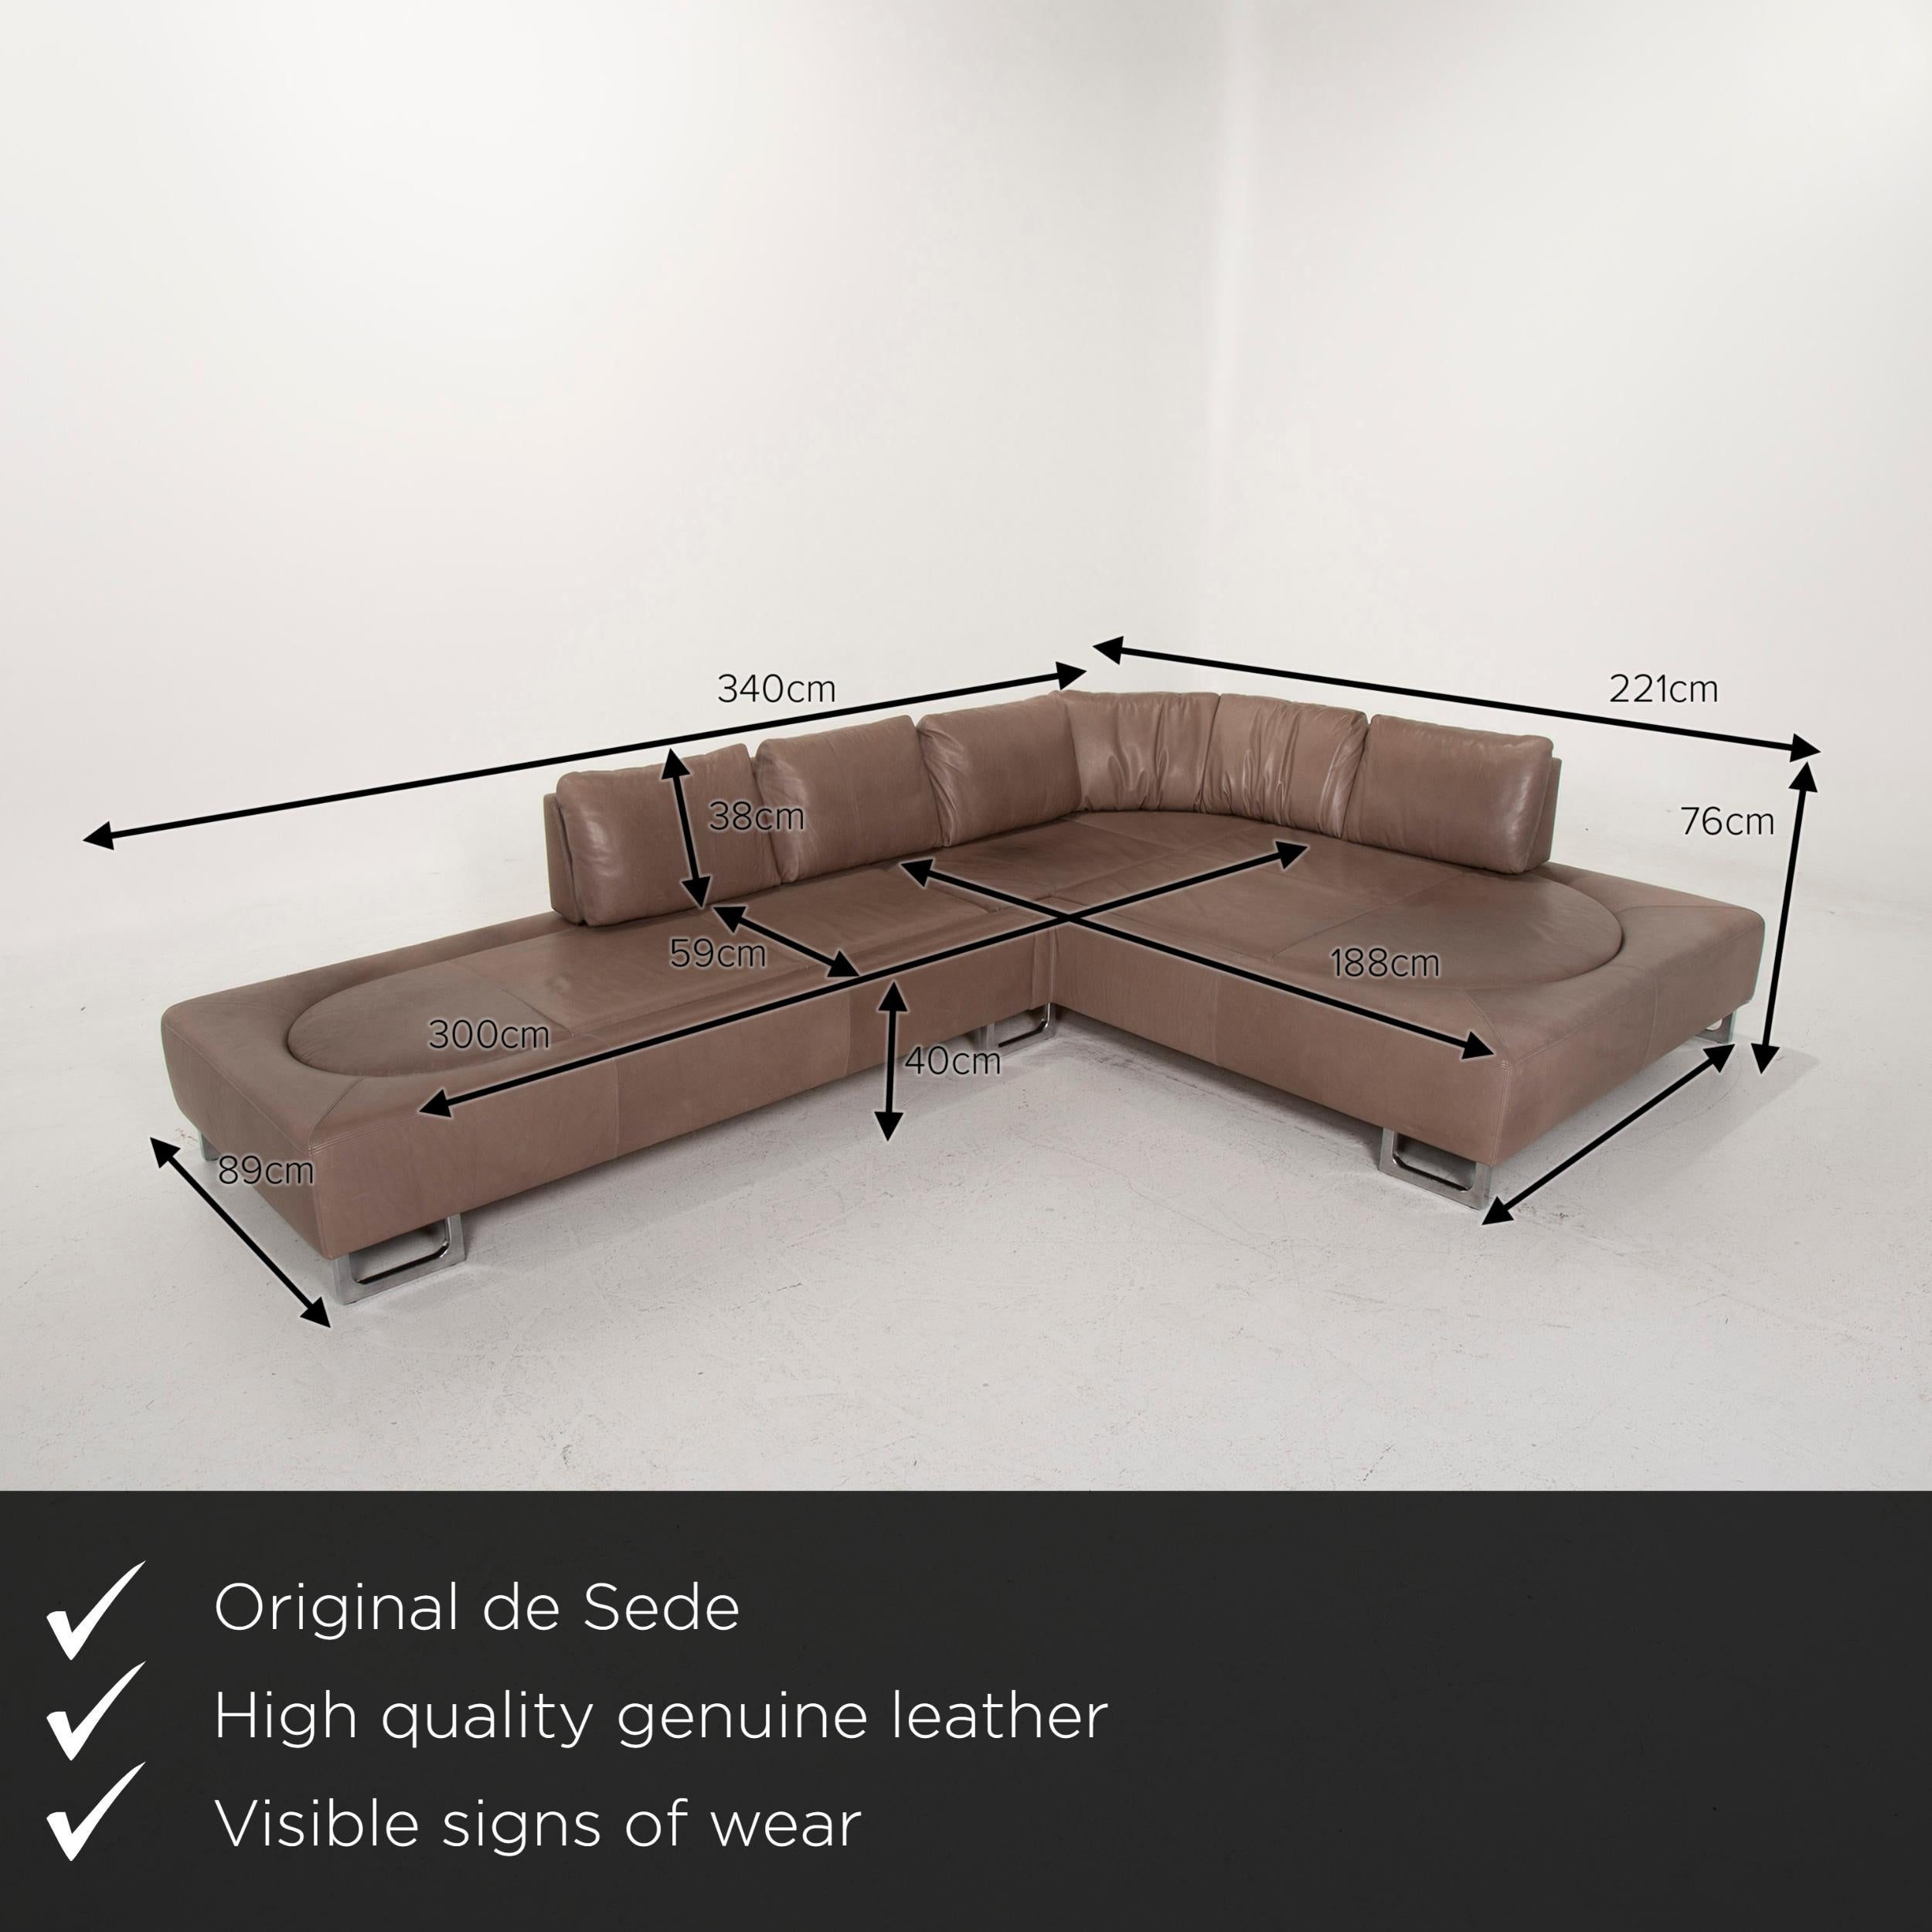 We present to you a De Sede ds 165 leather sofa brown corner sofa function.


 Product measurements in centimeters:
 

Depth 89
Width 340
Height 76
Seat height 40
Rest height
Seat depth 59
Seat width 300
Back height 38.

 